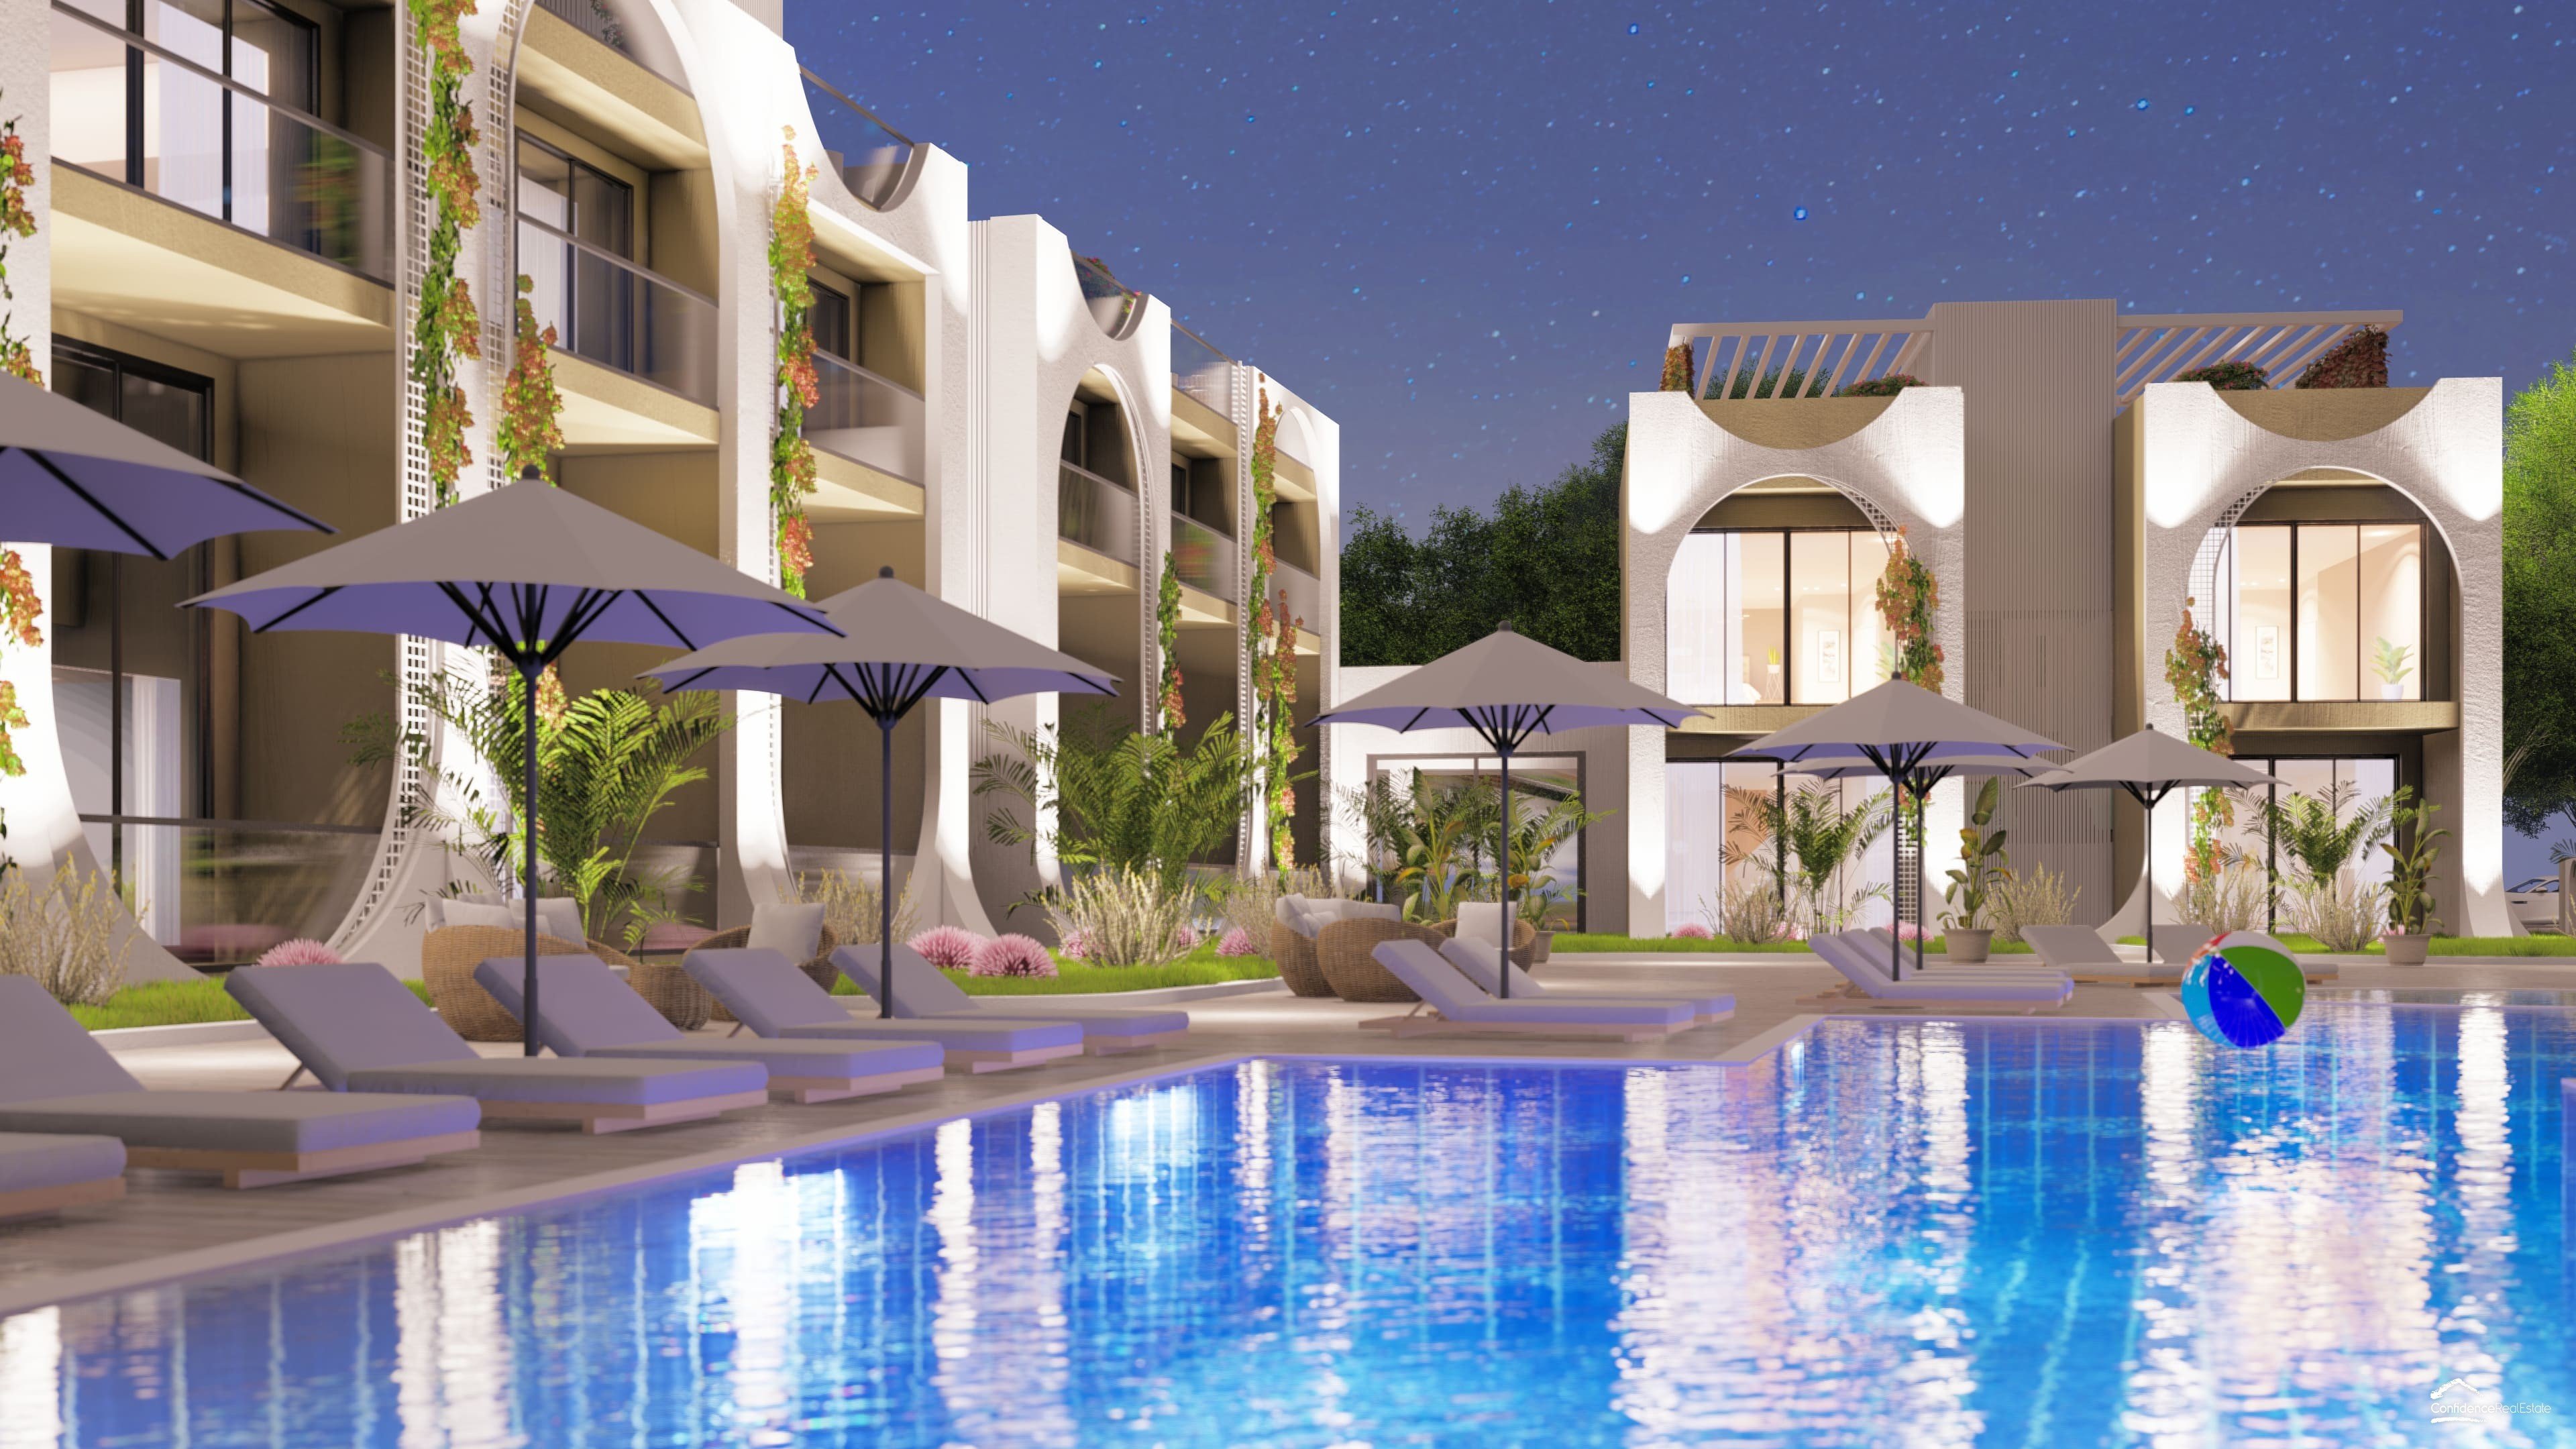 The project of residential apartments with sea and mountain views in Northern Cyprus, Esentepe